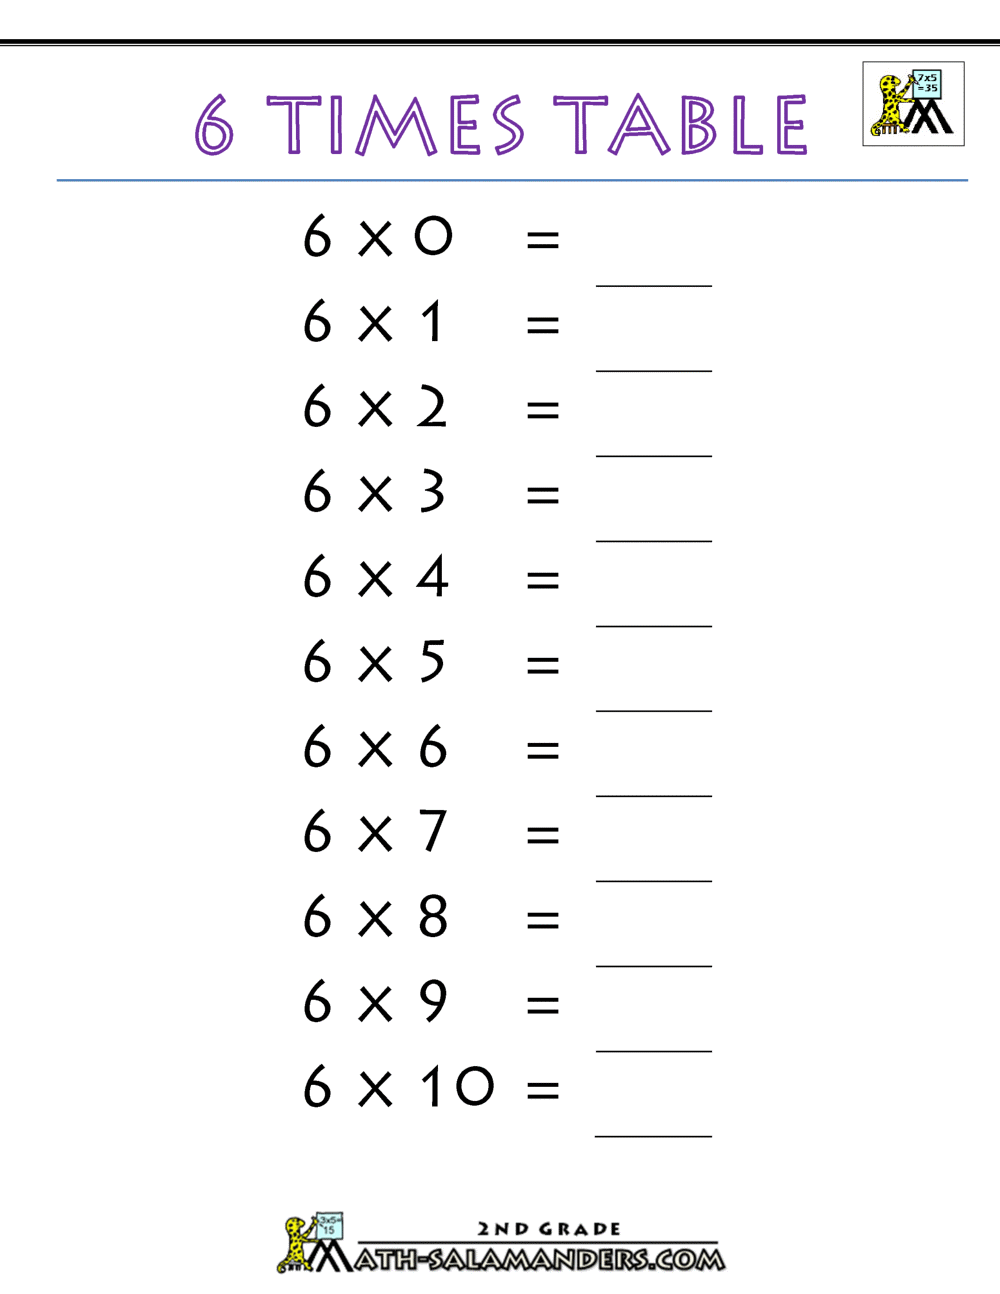 22 Times Table Throughout 6 Times Table Worksheet